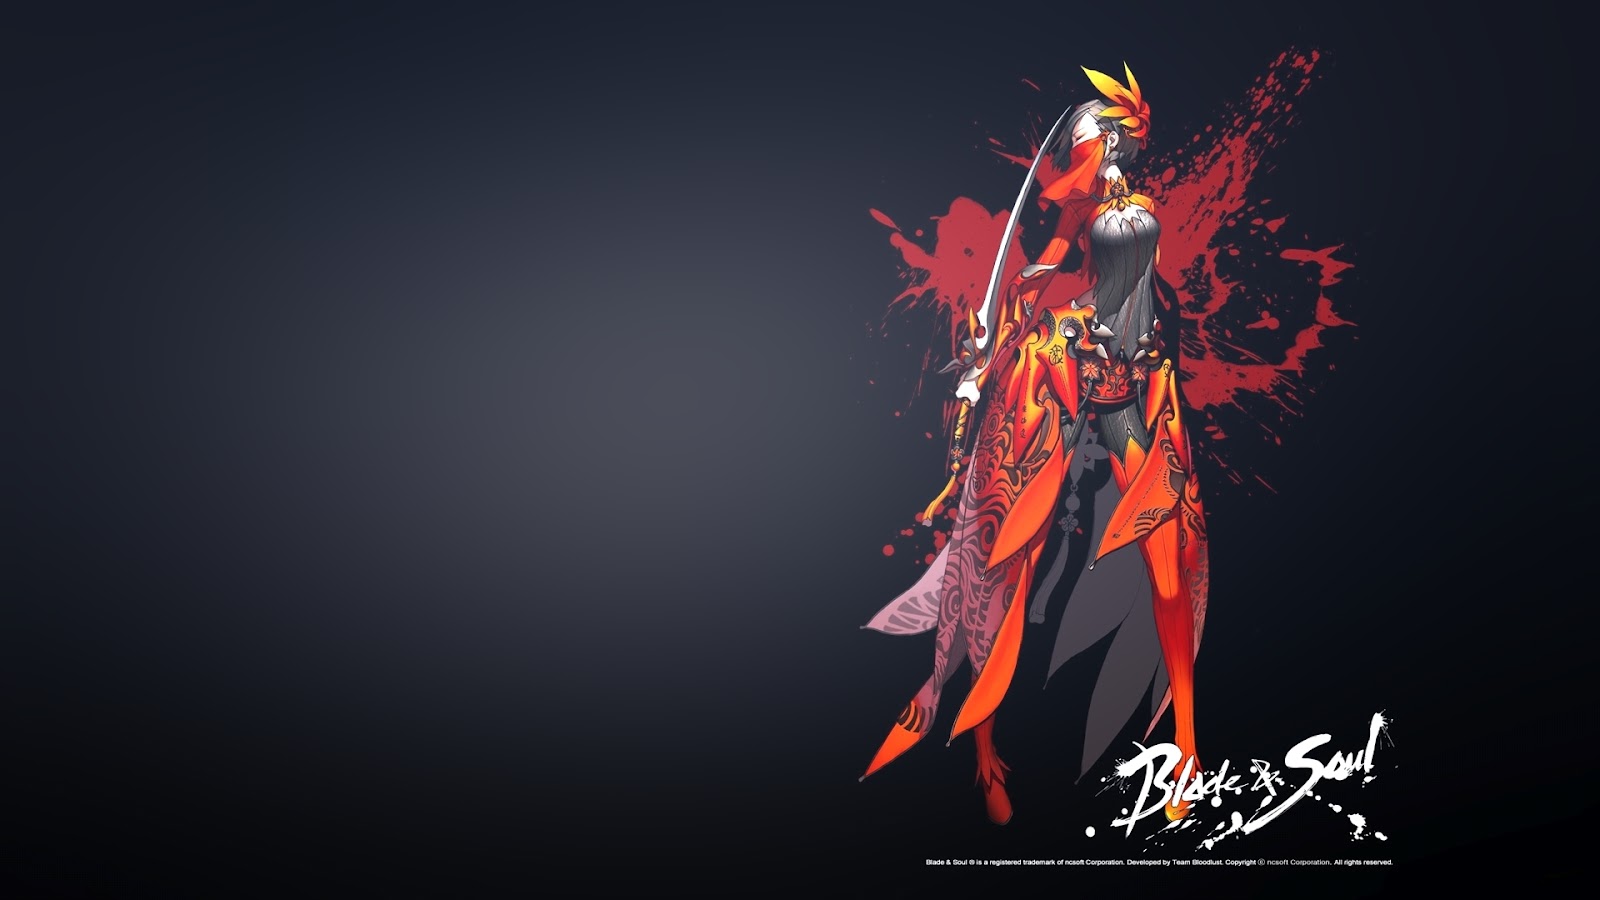 Just Walls Blade and Soul Wallpaper